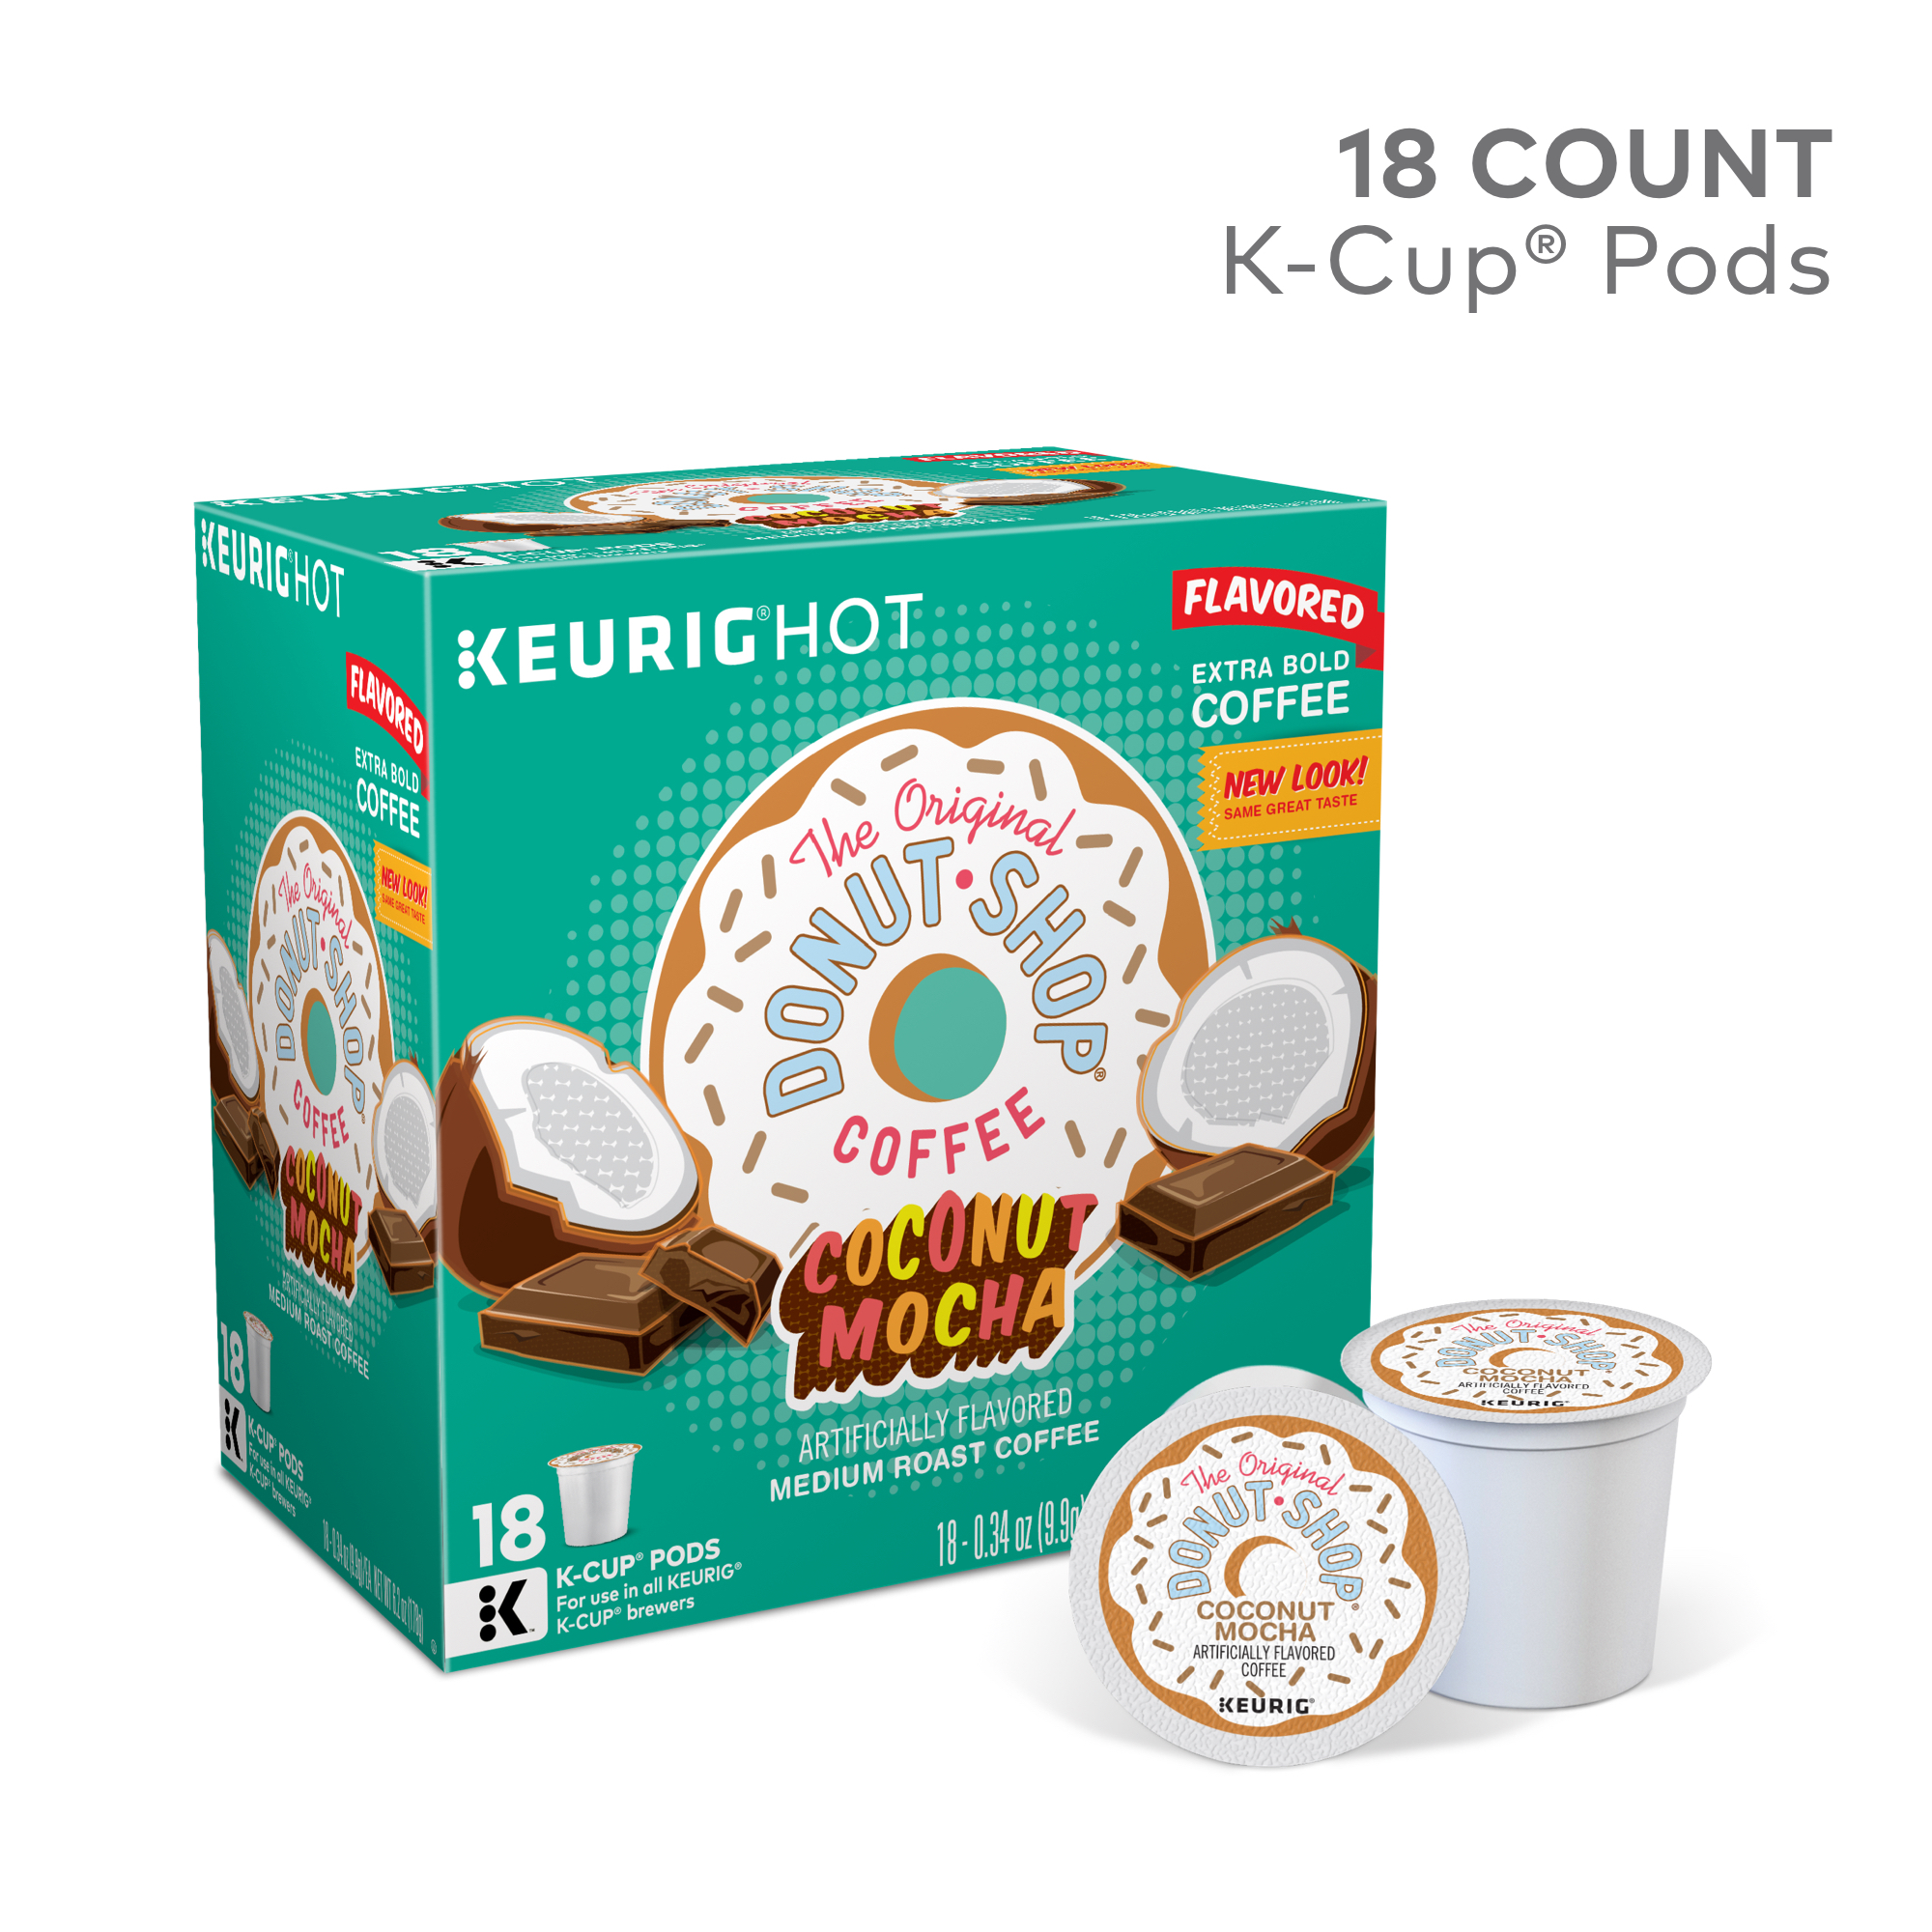 The Original Donut Shop Coconut Mocha Flavored K-Cup Coffee Pods, Medium Roast, 18 Count for Keurig Brewers - image 1 of 10